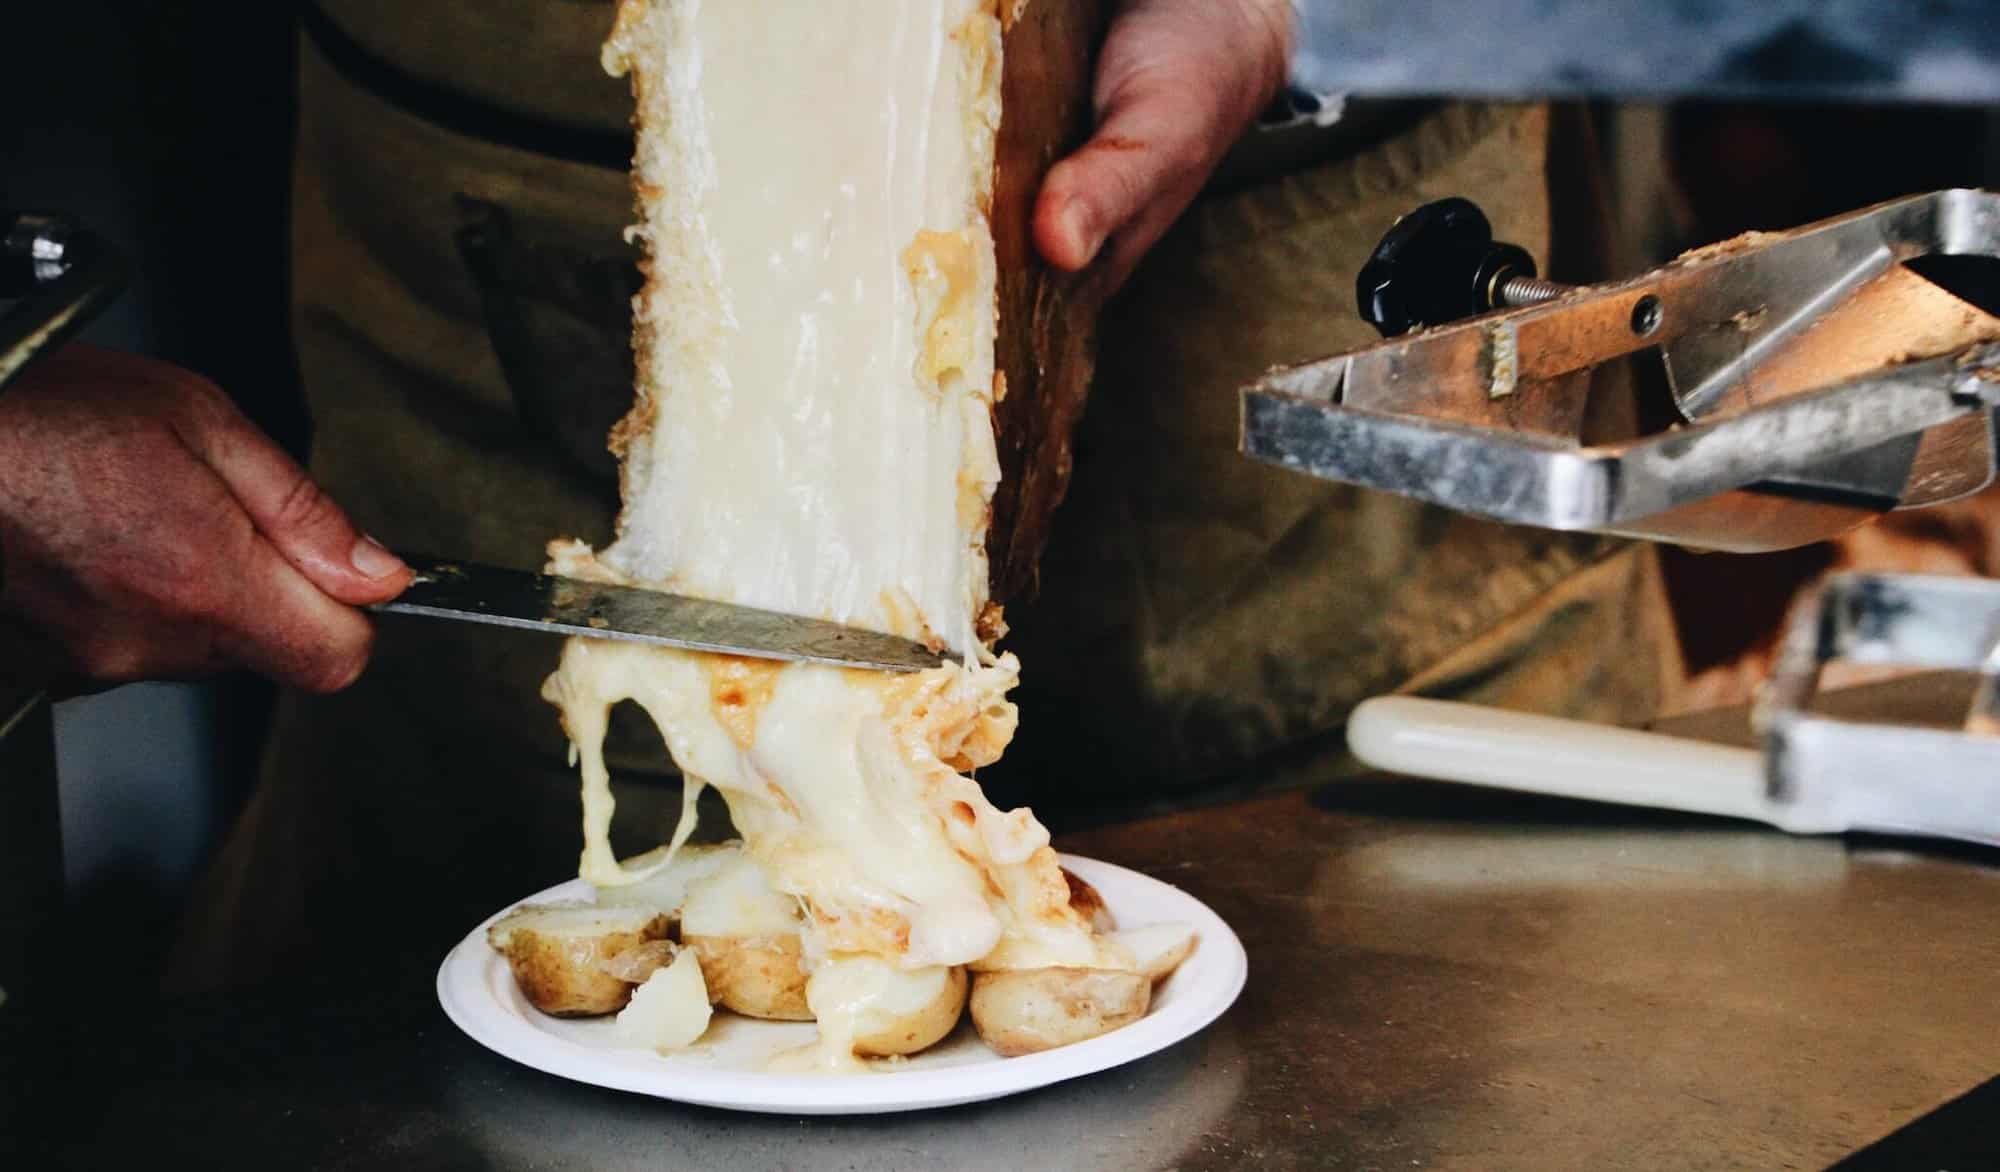 A man scrapes a half-moon slice of raclette cheese to a plate of potatoes.